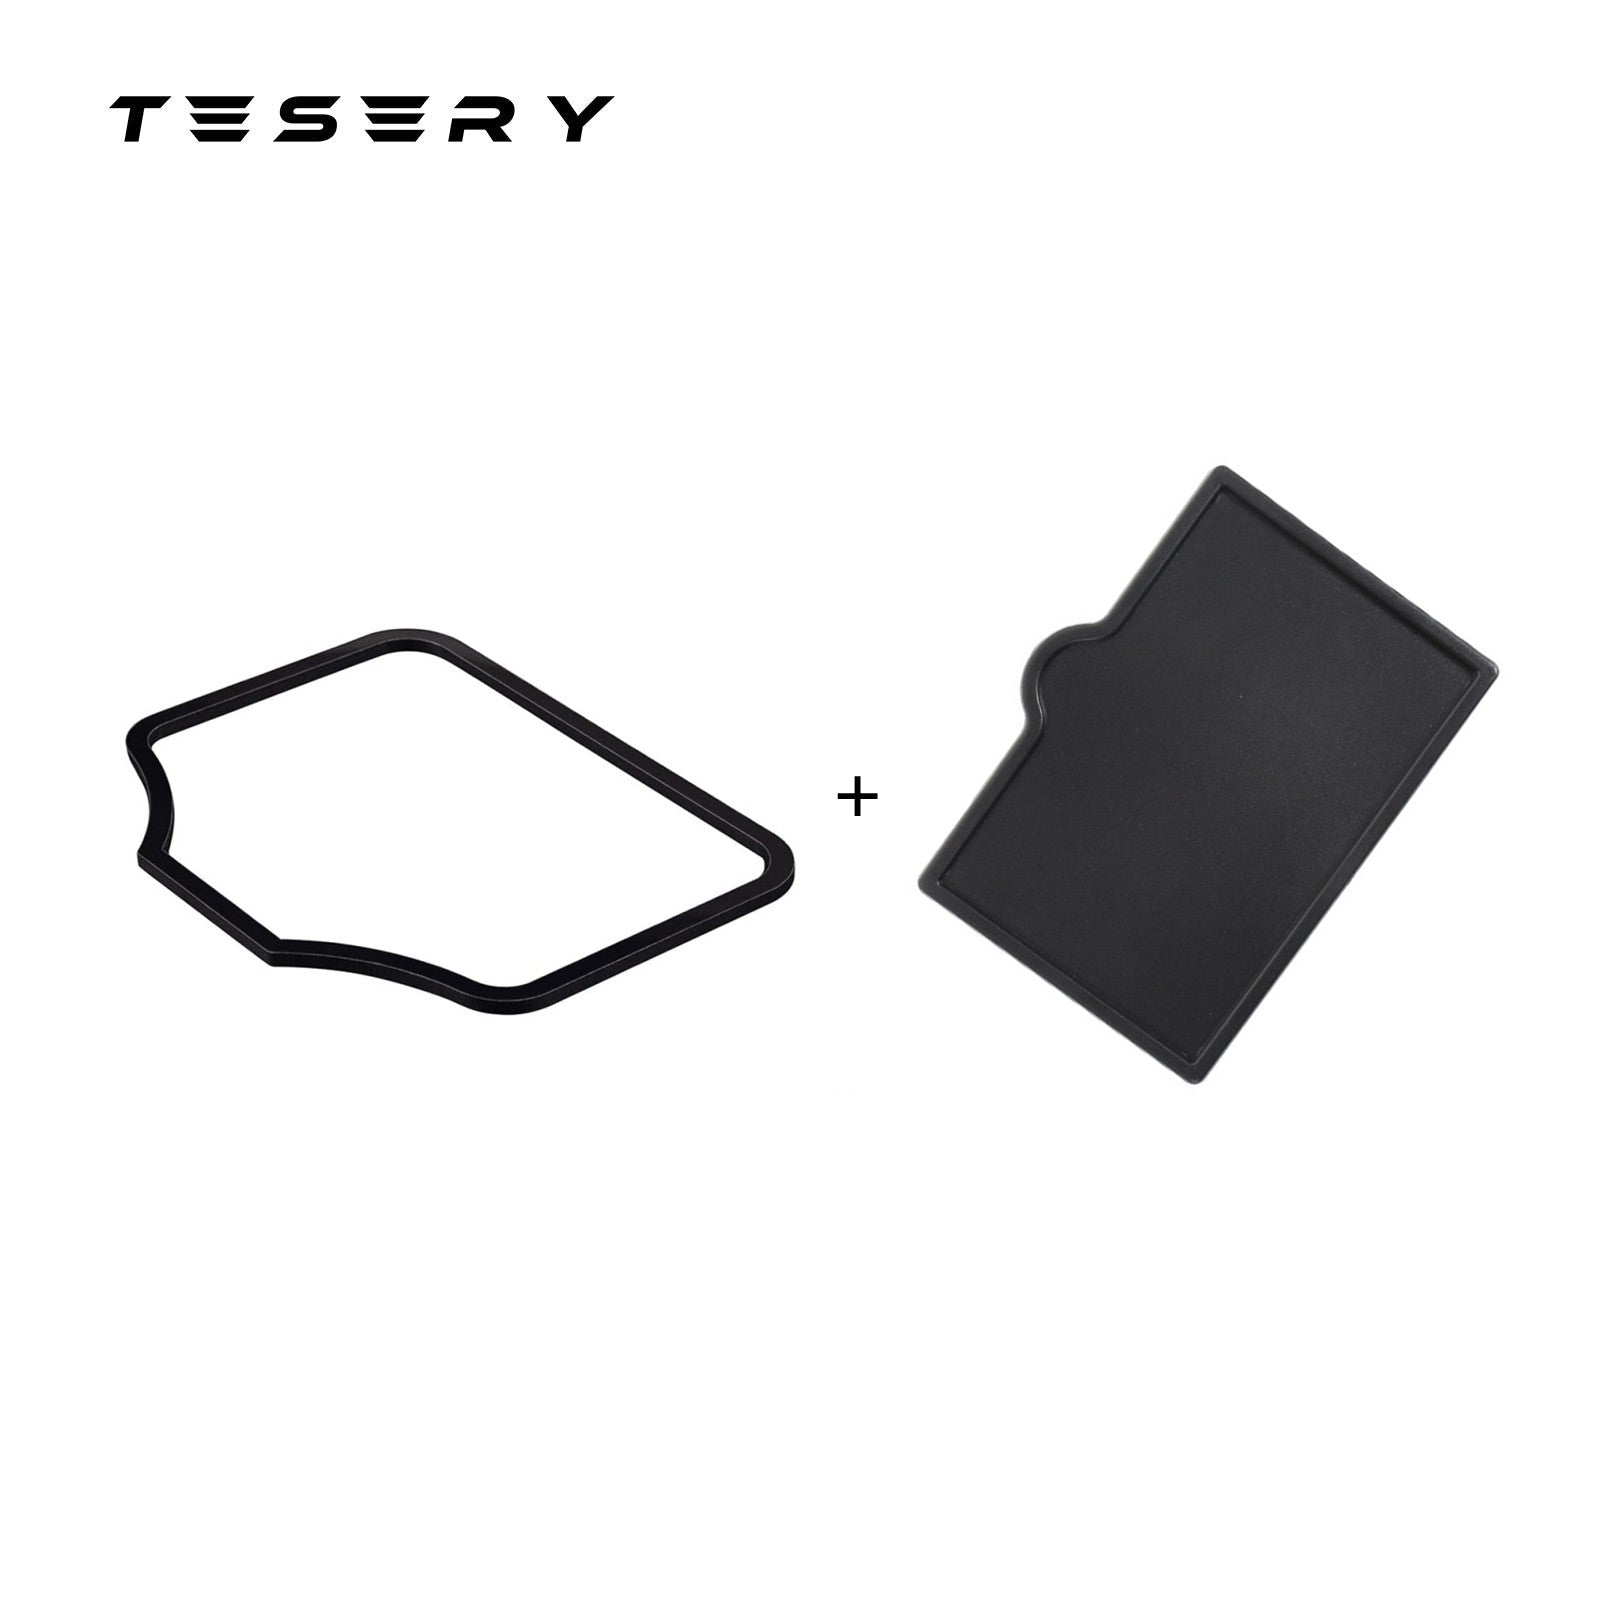 Tesla Key Card Cover  Tesery Official Store